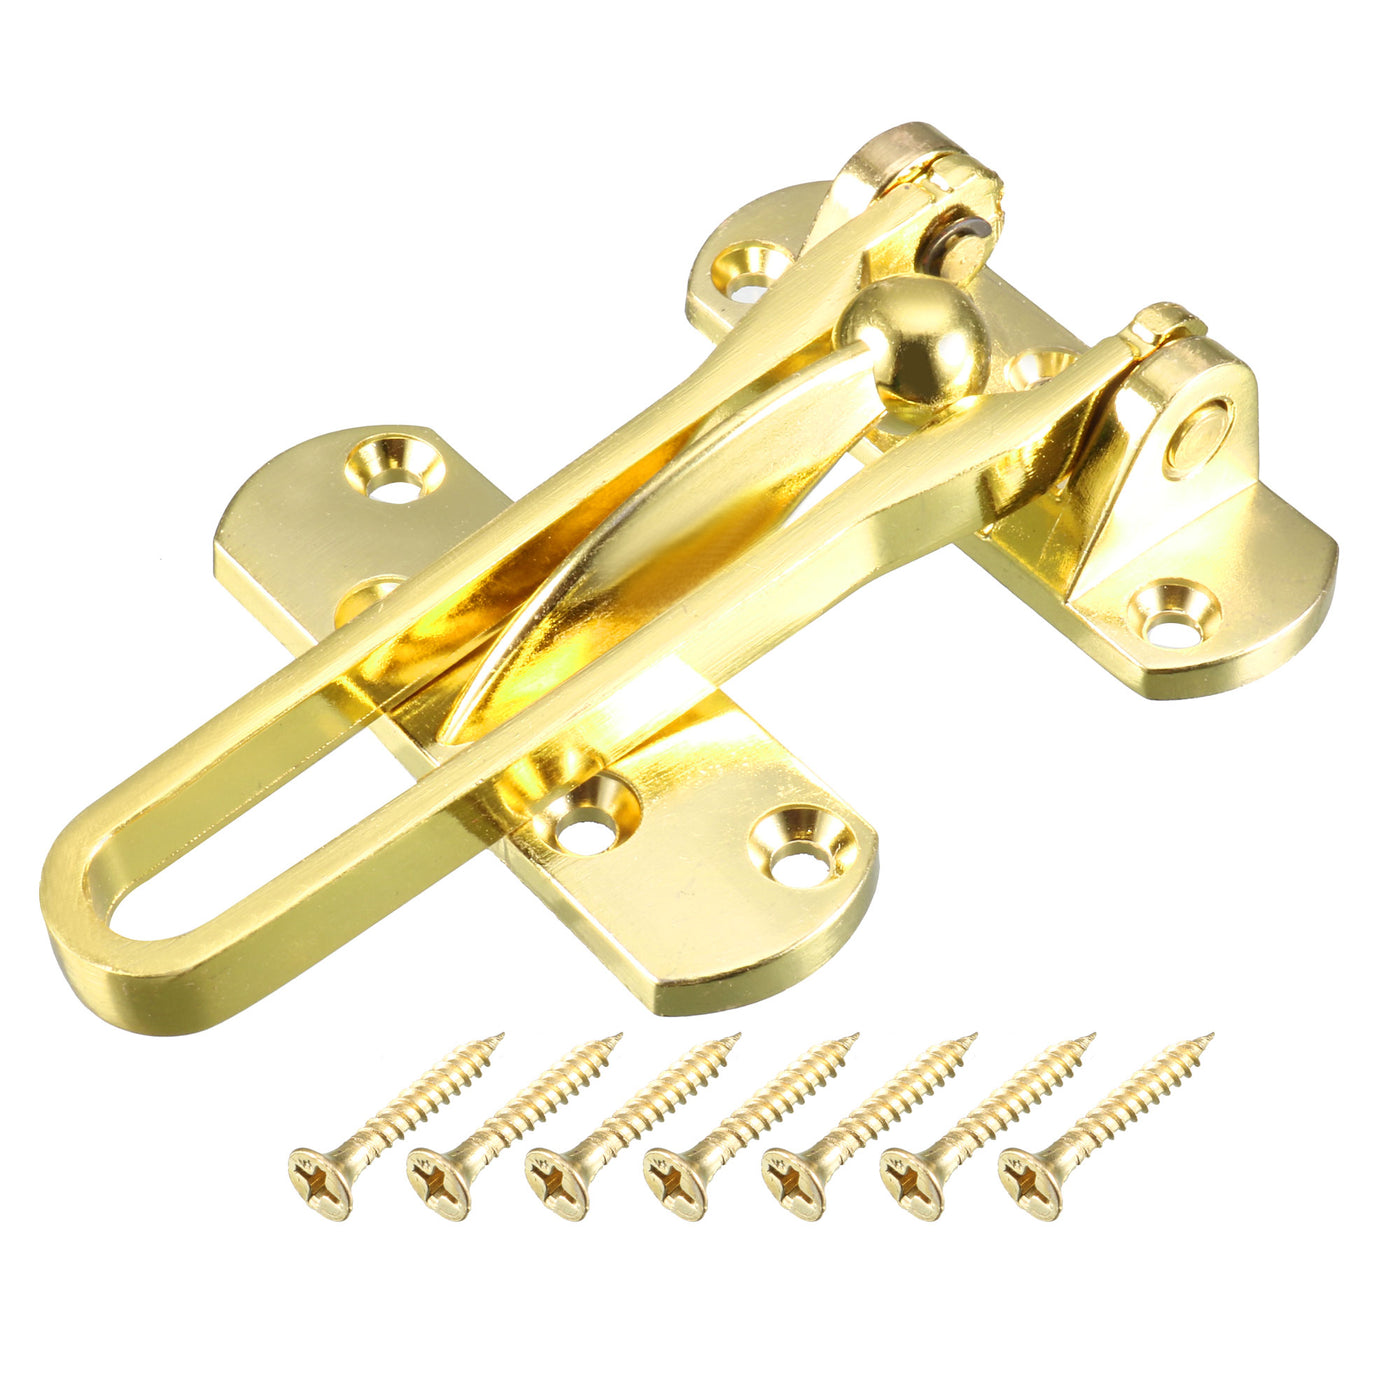 uxcell Uxcell Household Door Restrictor Lock Catch Metal Safety Security Chain Latch Gold Tone